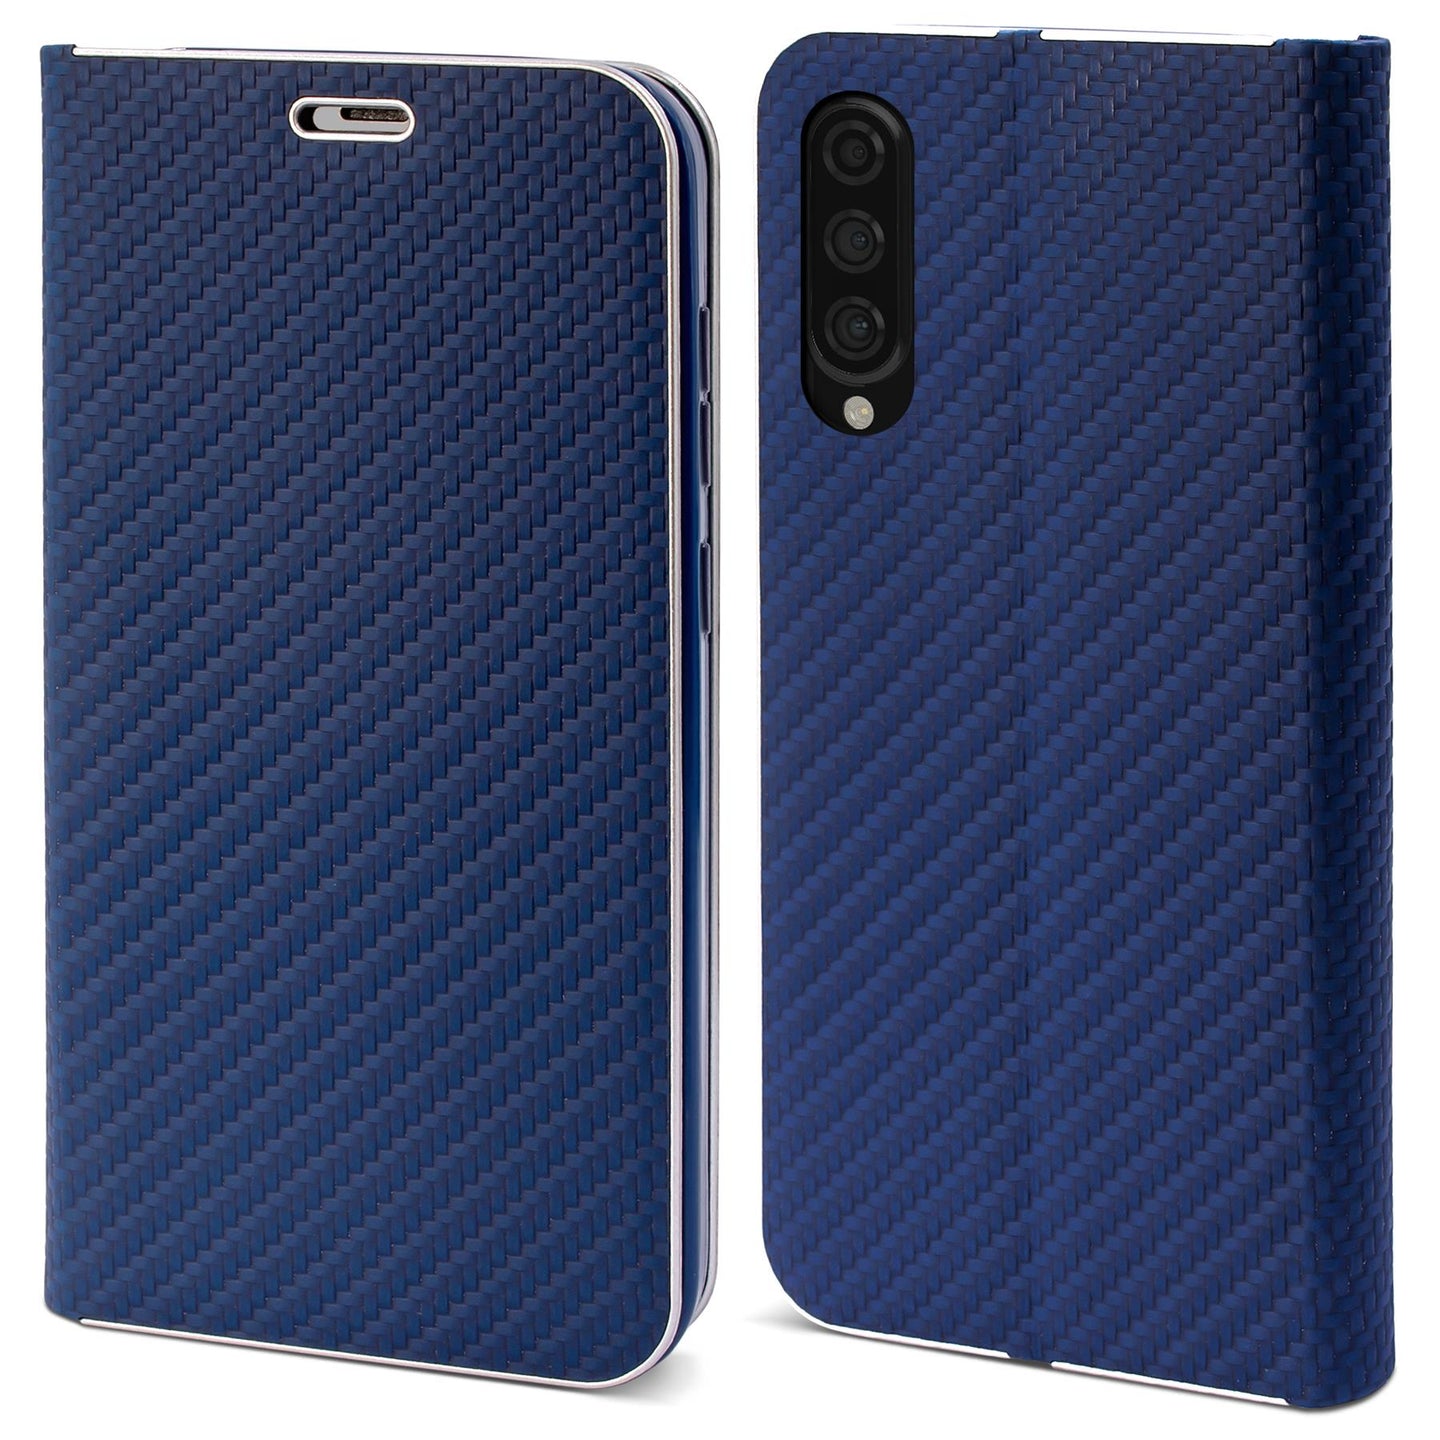 Moozy Wallet Case for Samsung A50, Dark Blue Carbon – Metallic Edge Protection Magnetic Closure Flip Cover with Card Holder